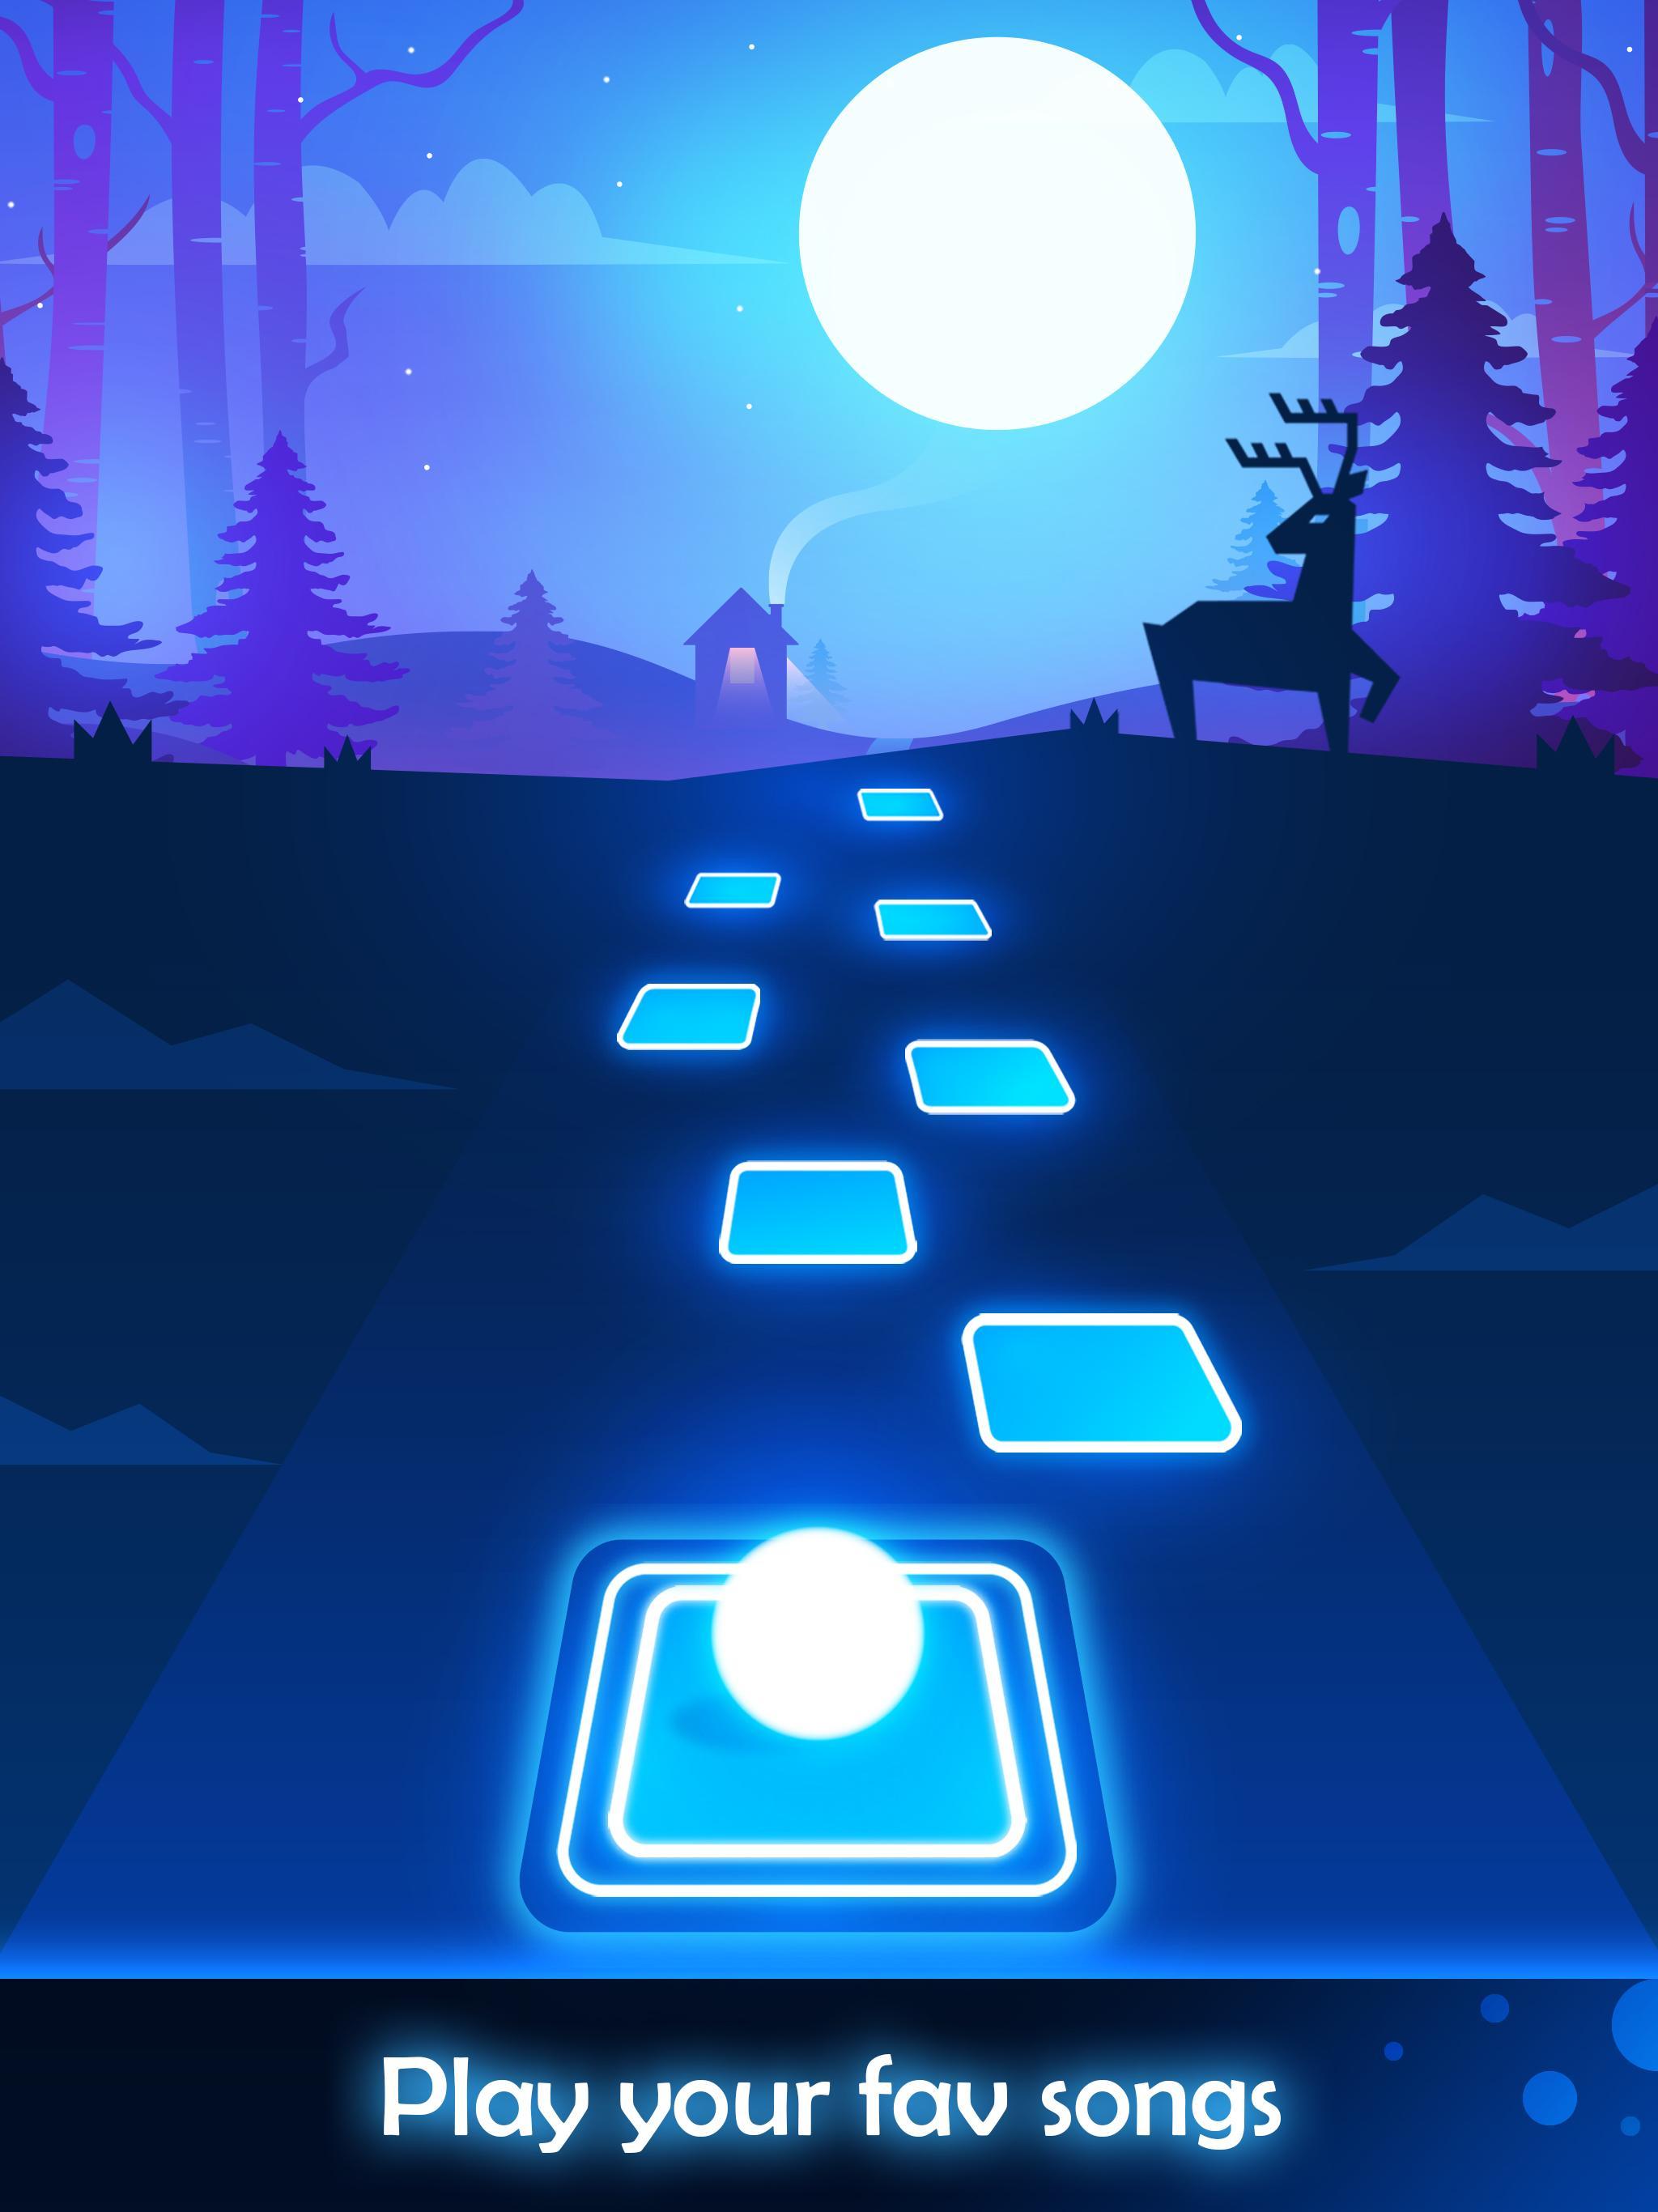 Tiles Hop for Android - APK Download